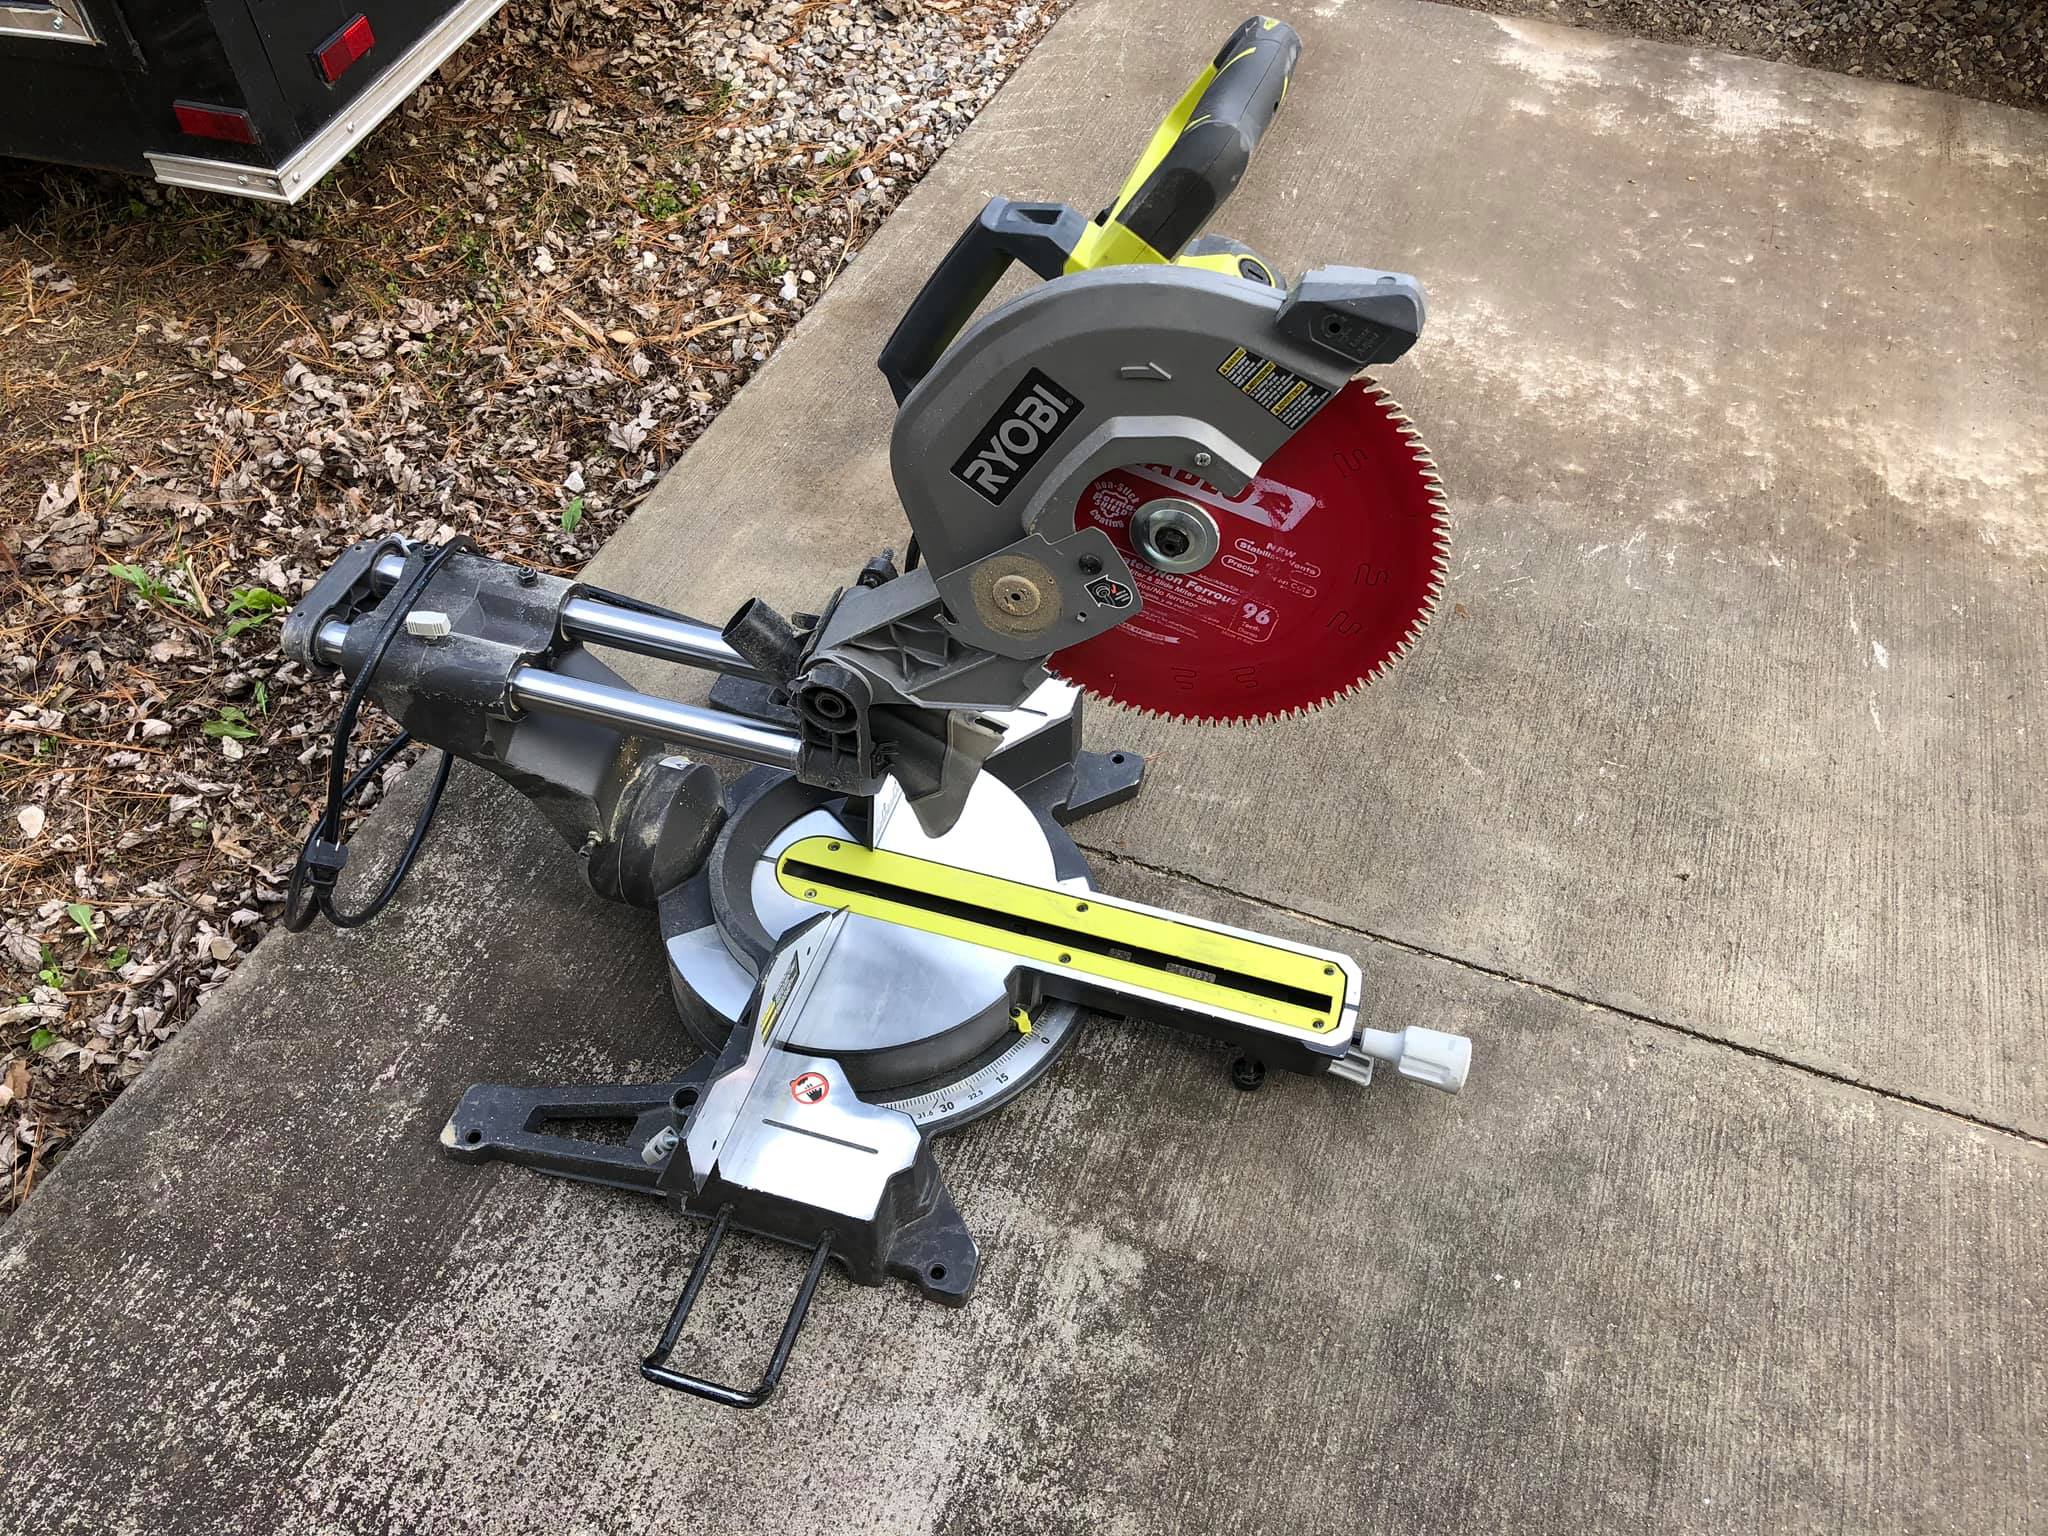 Ryobi TSS120L Review: Is This Saw Worth Your Money?